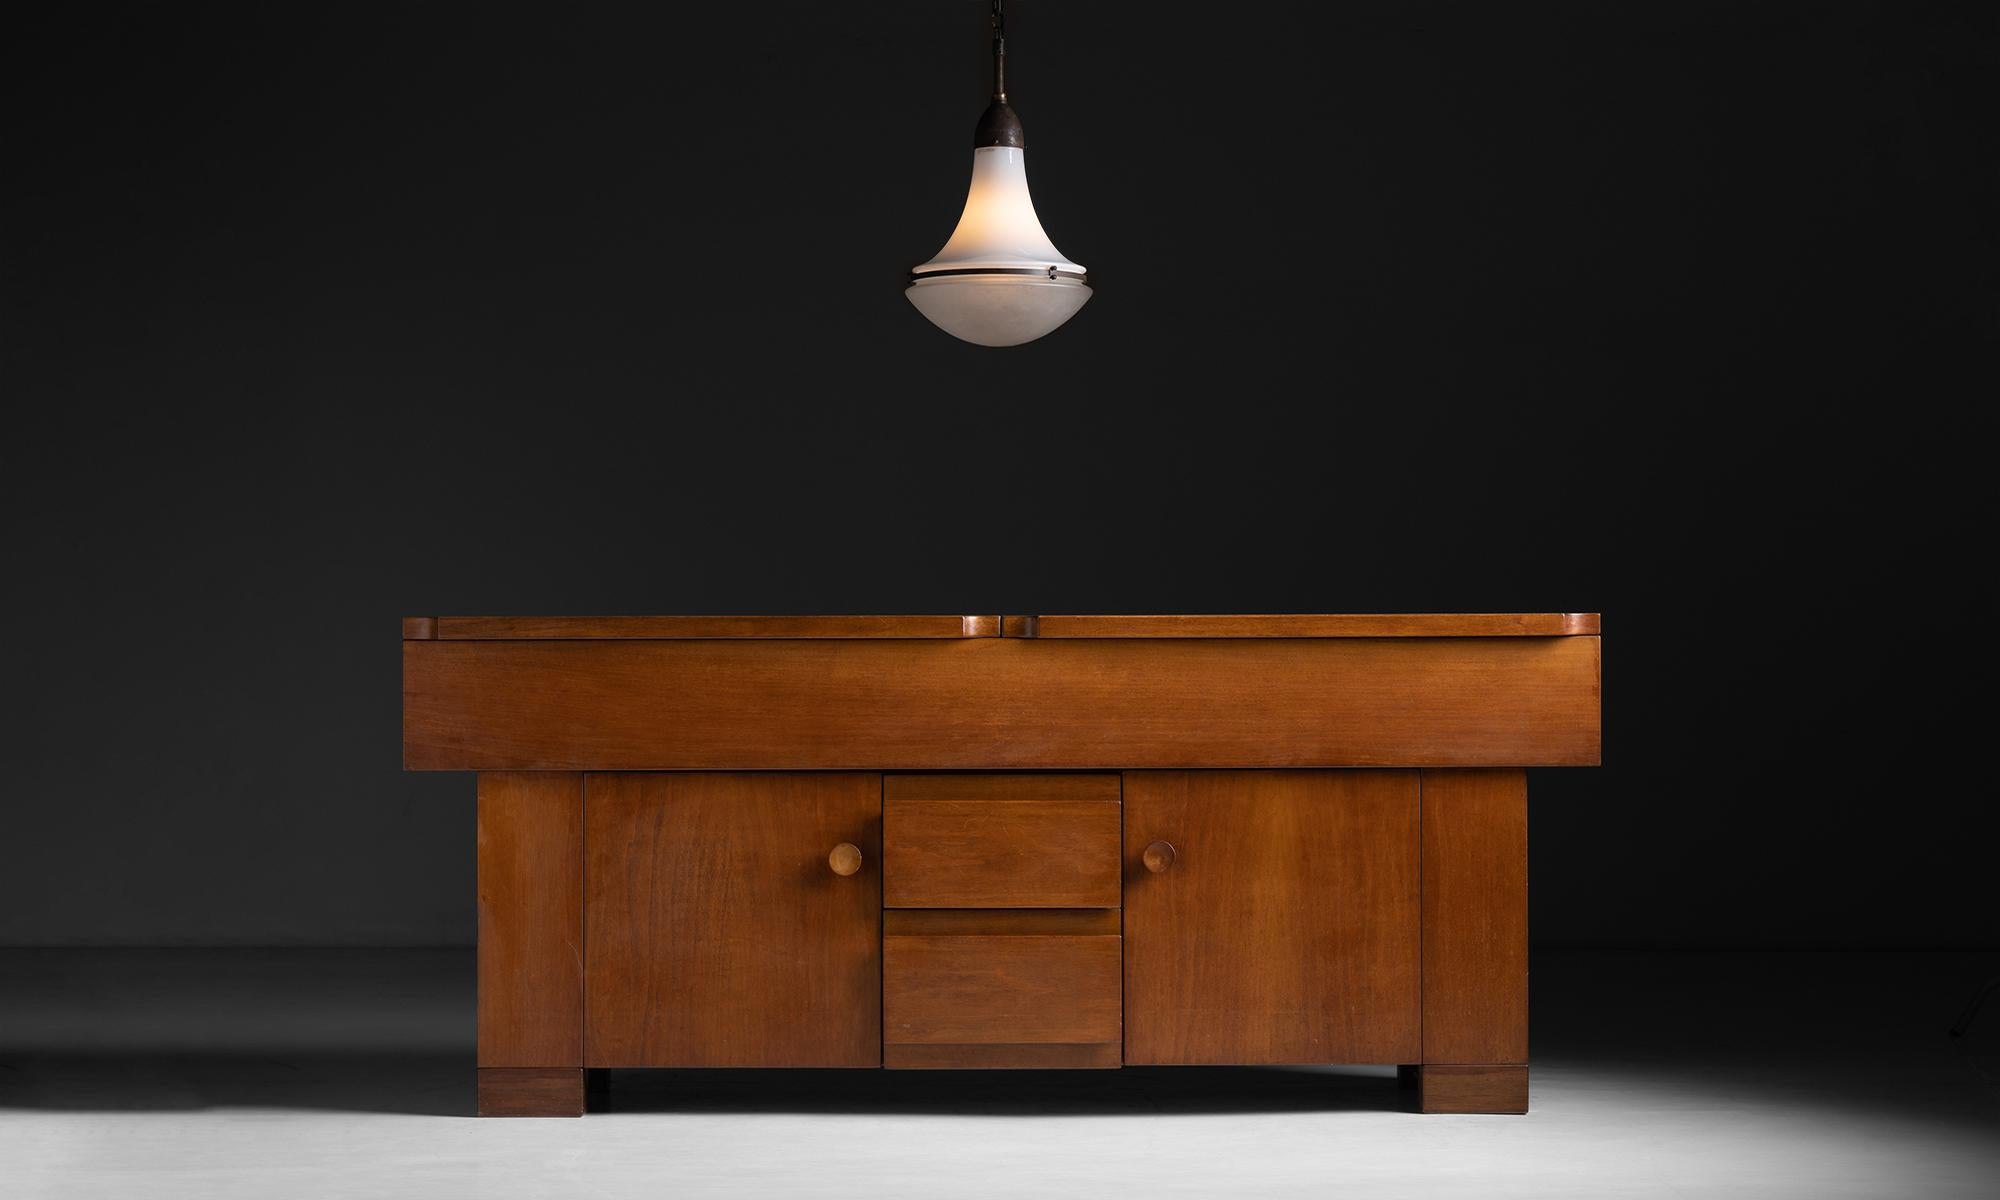 Walnut Sideboard by Giovanni Michelucci, Italy circa 1965

Designed for Poltronova with beautiful architectural lines. Two cupboards, two drawers and a hinged top, etched with the designers signature.

Measures 78.5”L x 20.5”d x 33”h.